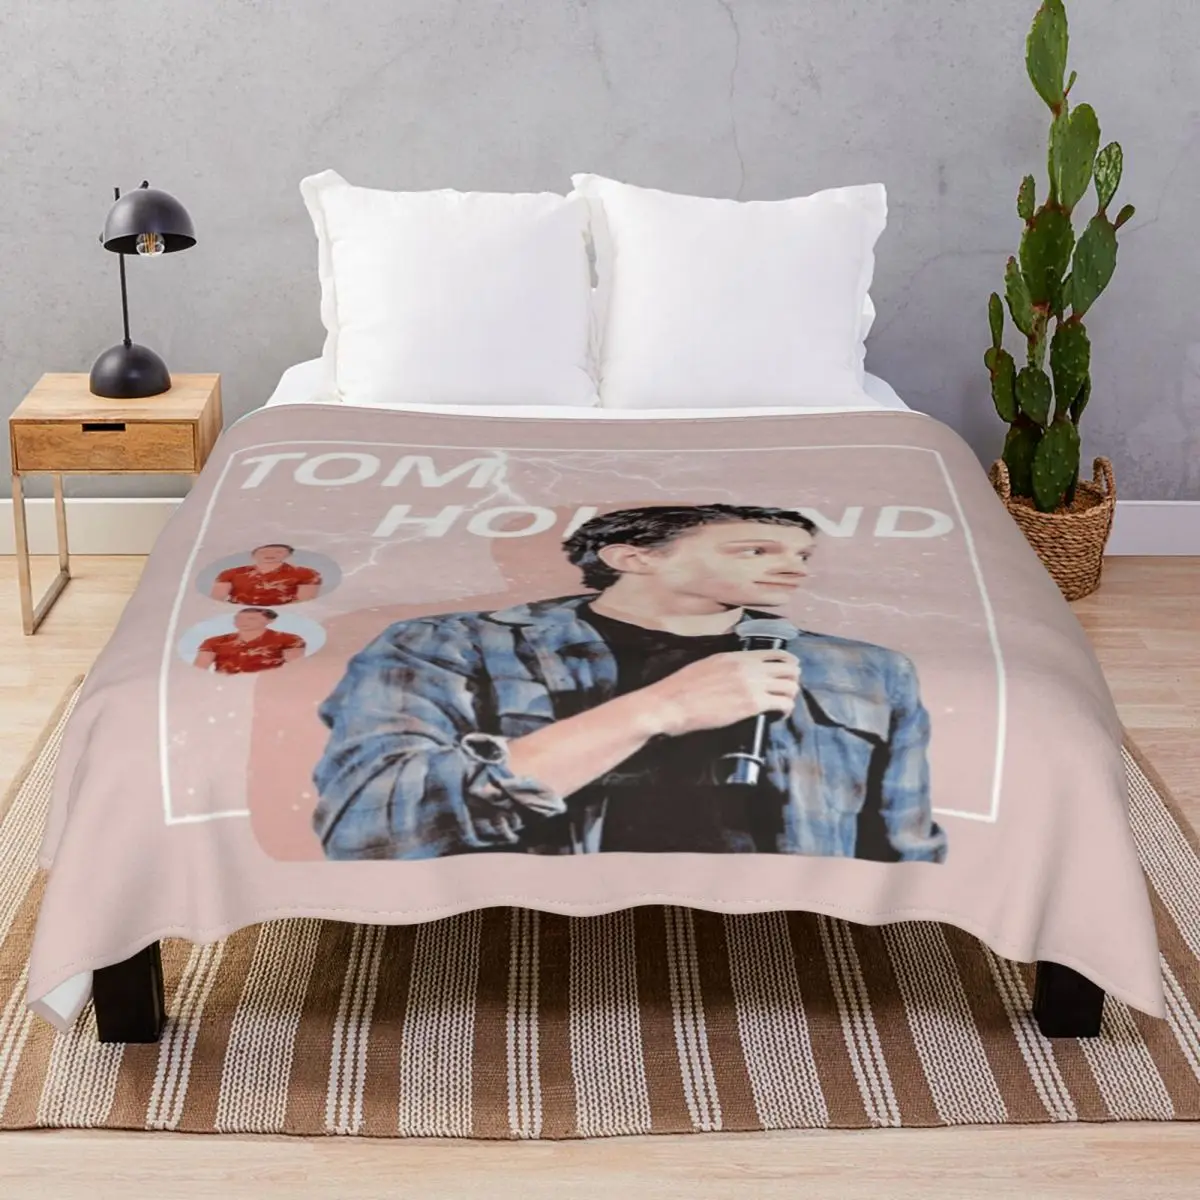 Tom Holland Blankets Flannel Plush Decoration Soft Throw Blanket for Bedding Home Couch Travel Cinema